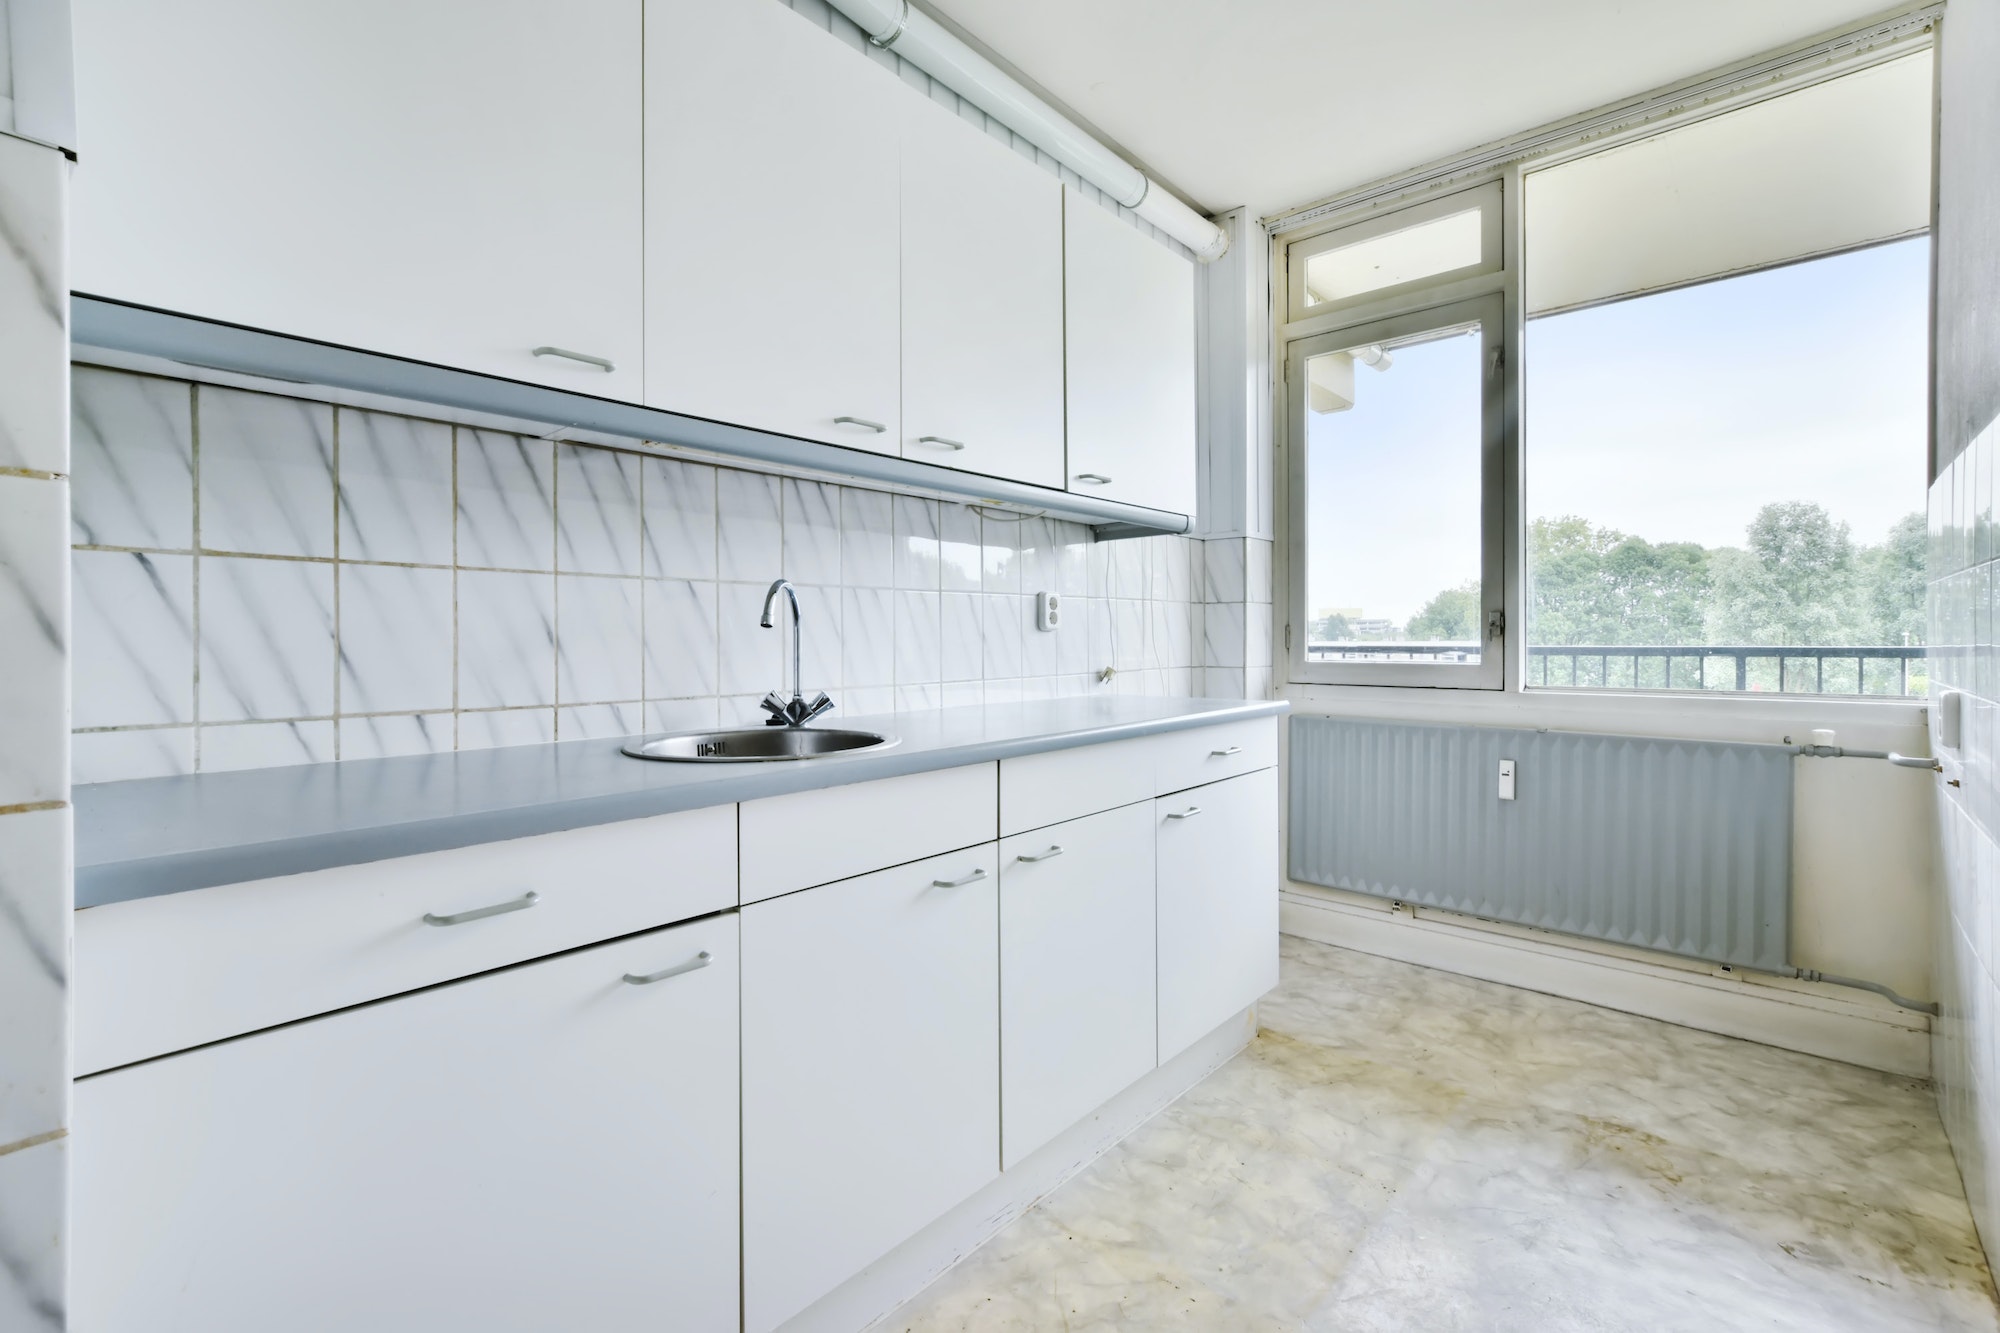 An empty and bright kitchen with a white kitchen set